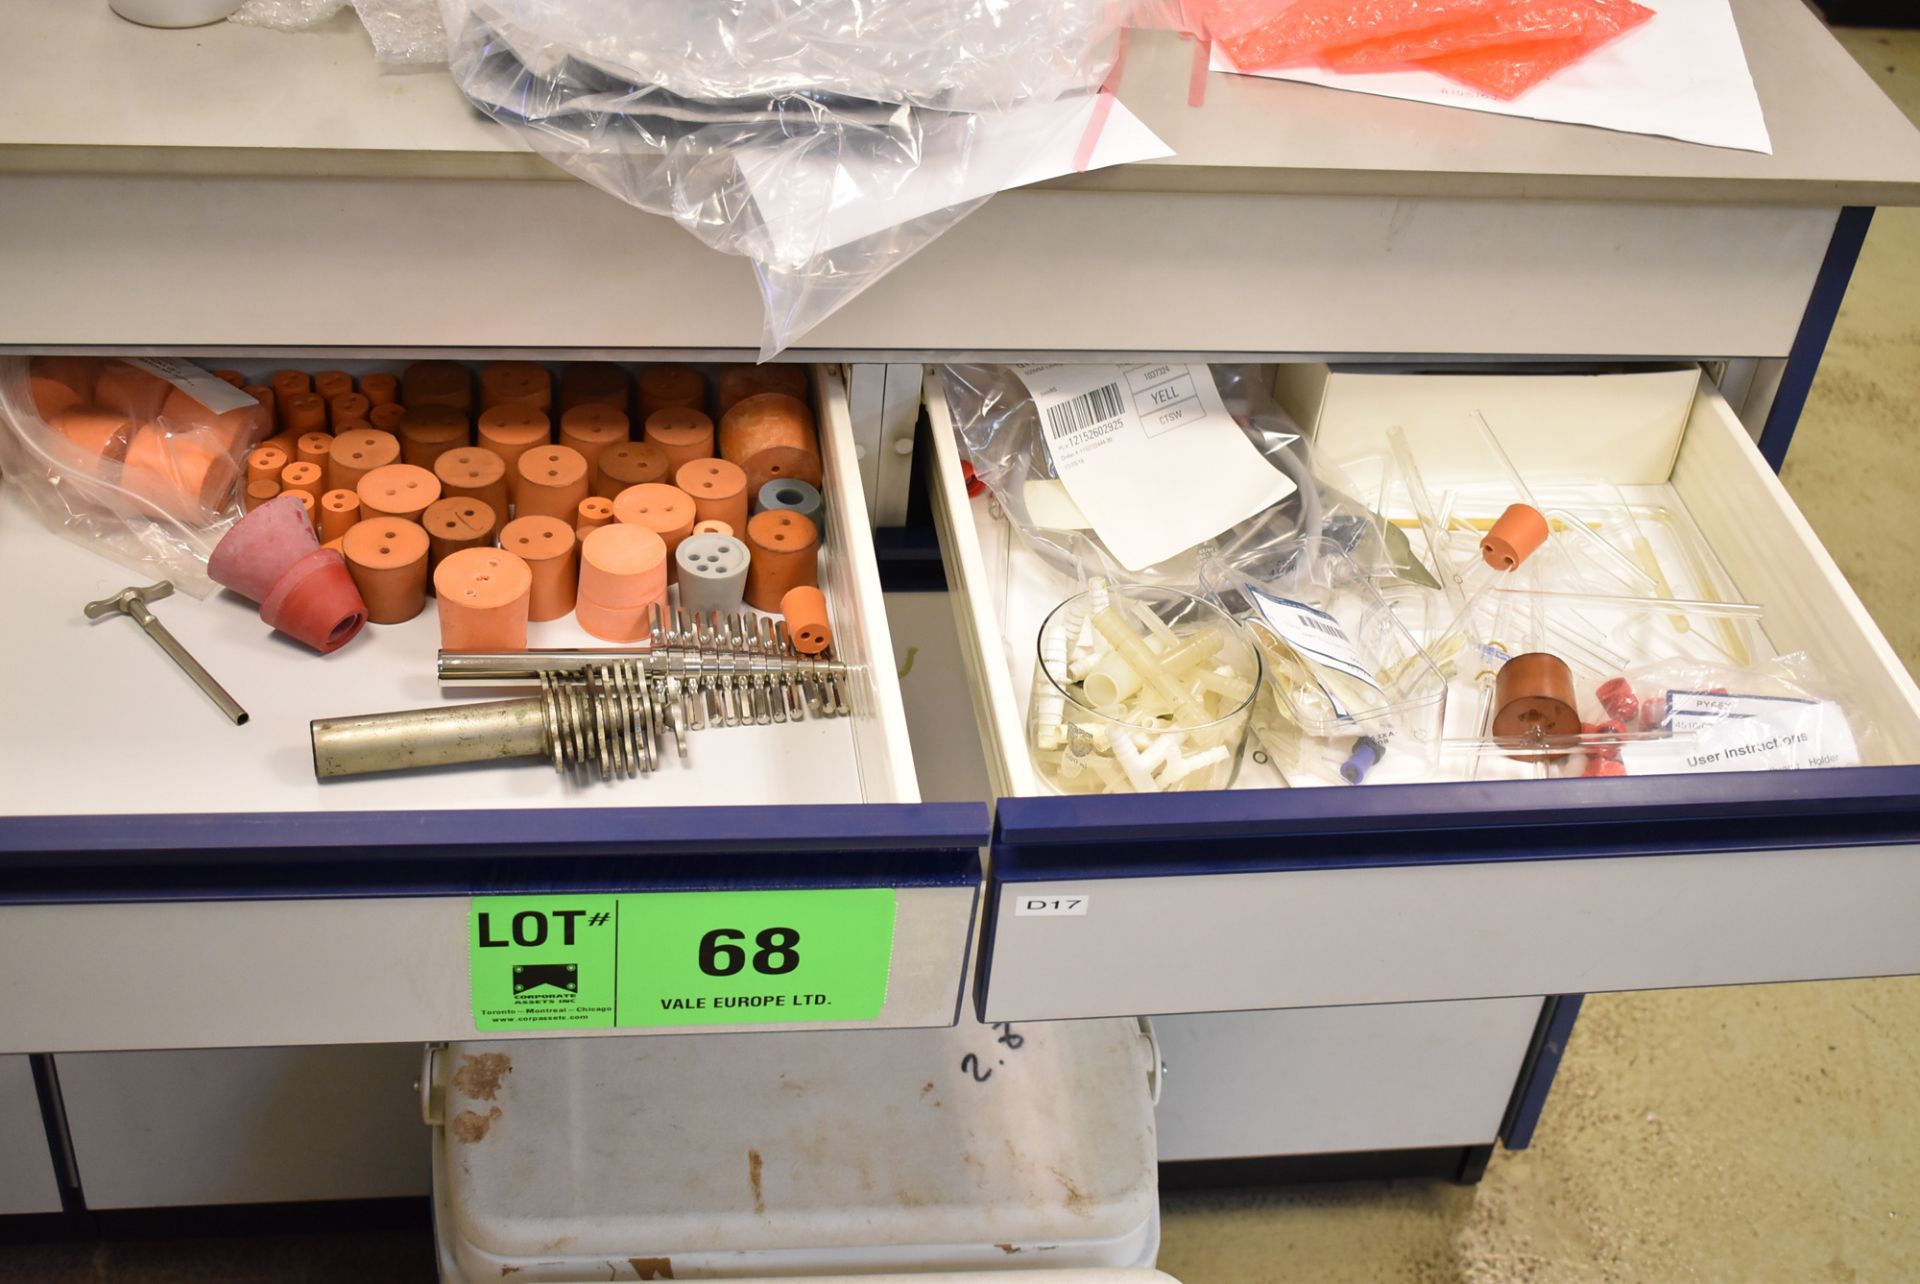 LOT/ 3 SECTION LAB STORAGE CABINET WITH CONTENTS - TISSUES, ROLLS, STATIONARY (ROOM 264) [RIGGING - Image 2 of 4